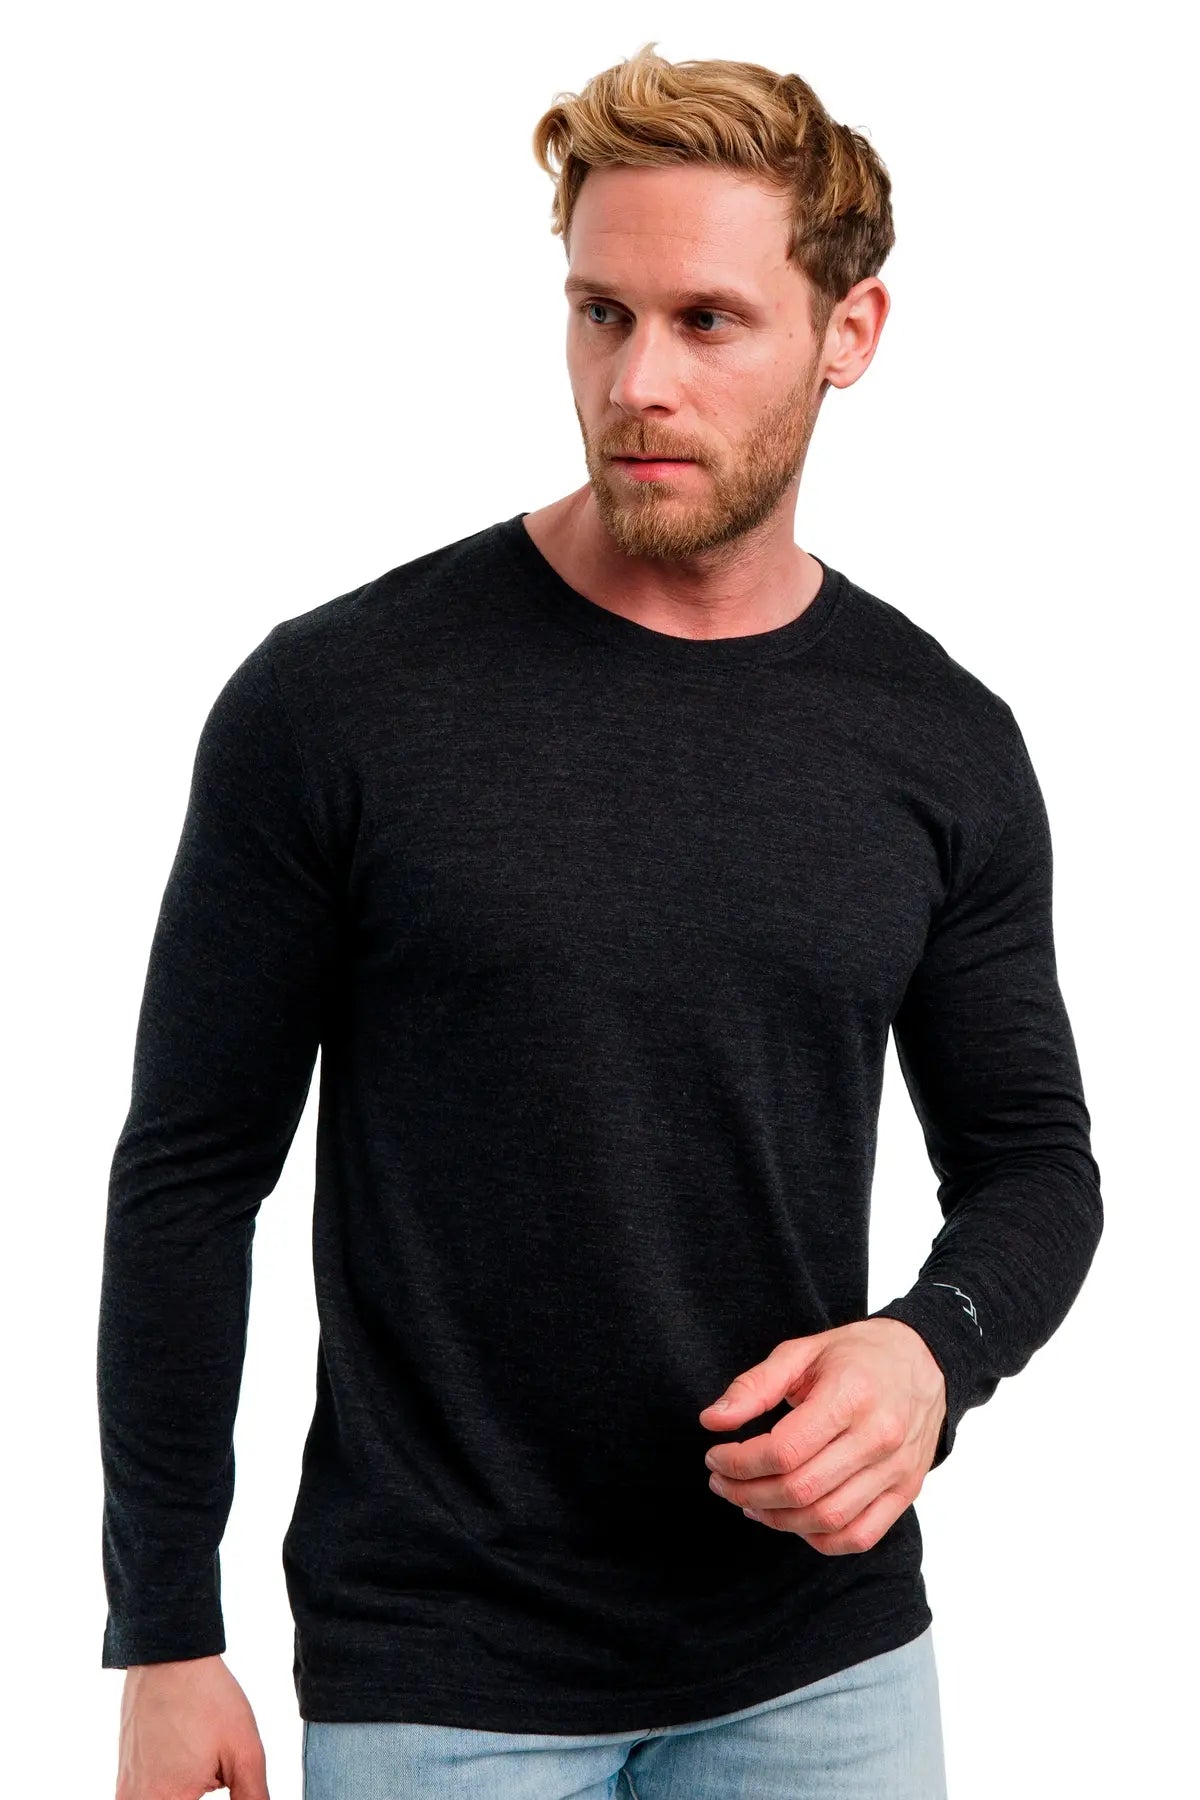 Explore Our Comprehensive Collection of Men's Long Sleeve Shirts ...